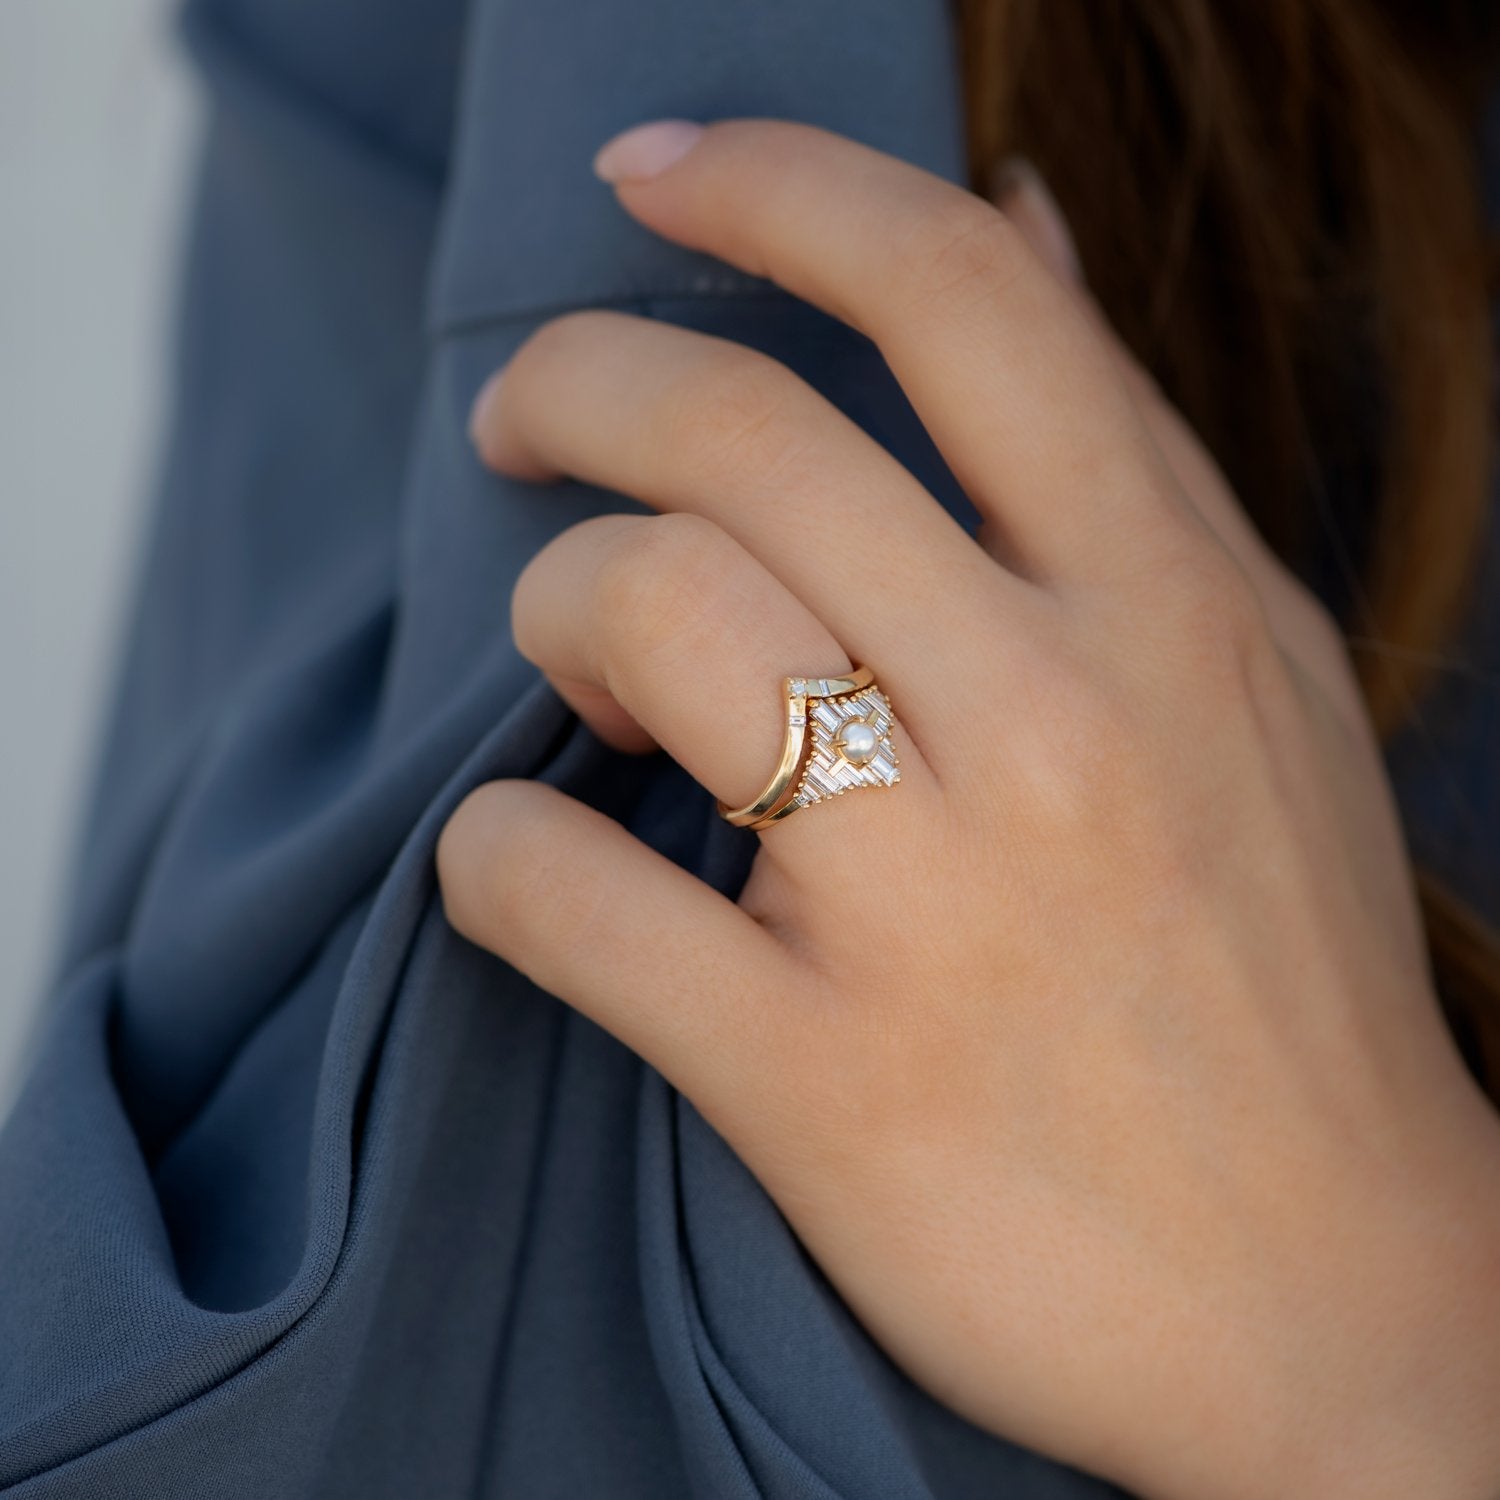 Pearl Ring: Do's and Dont's of wearing this moon stone